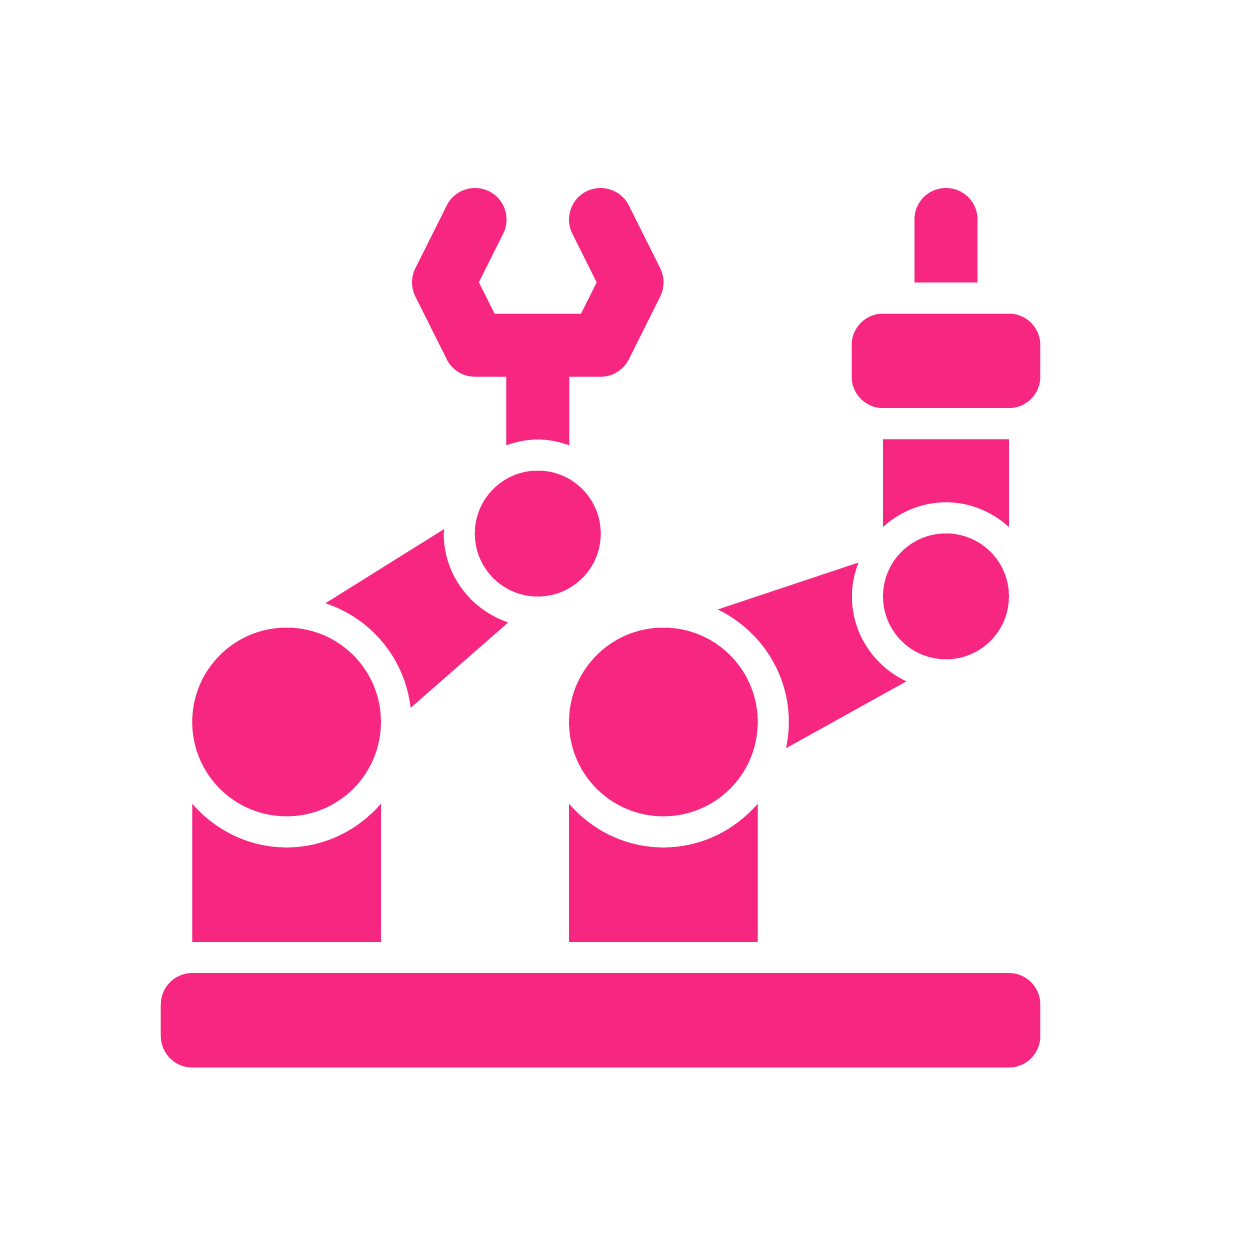 Automation PR and robotics PR, represented by some funky pink robot arms. Very close to each other. Spooning almost.